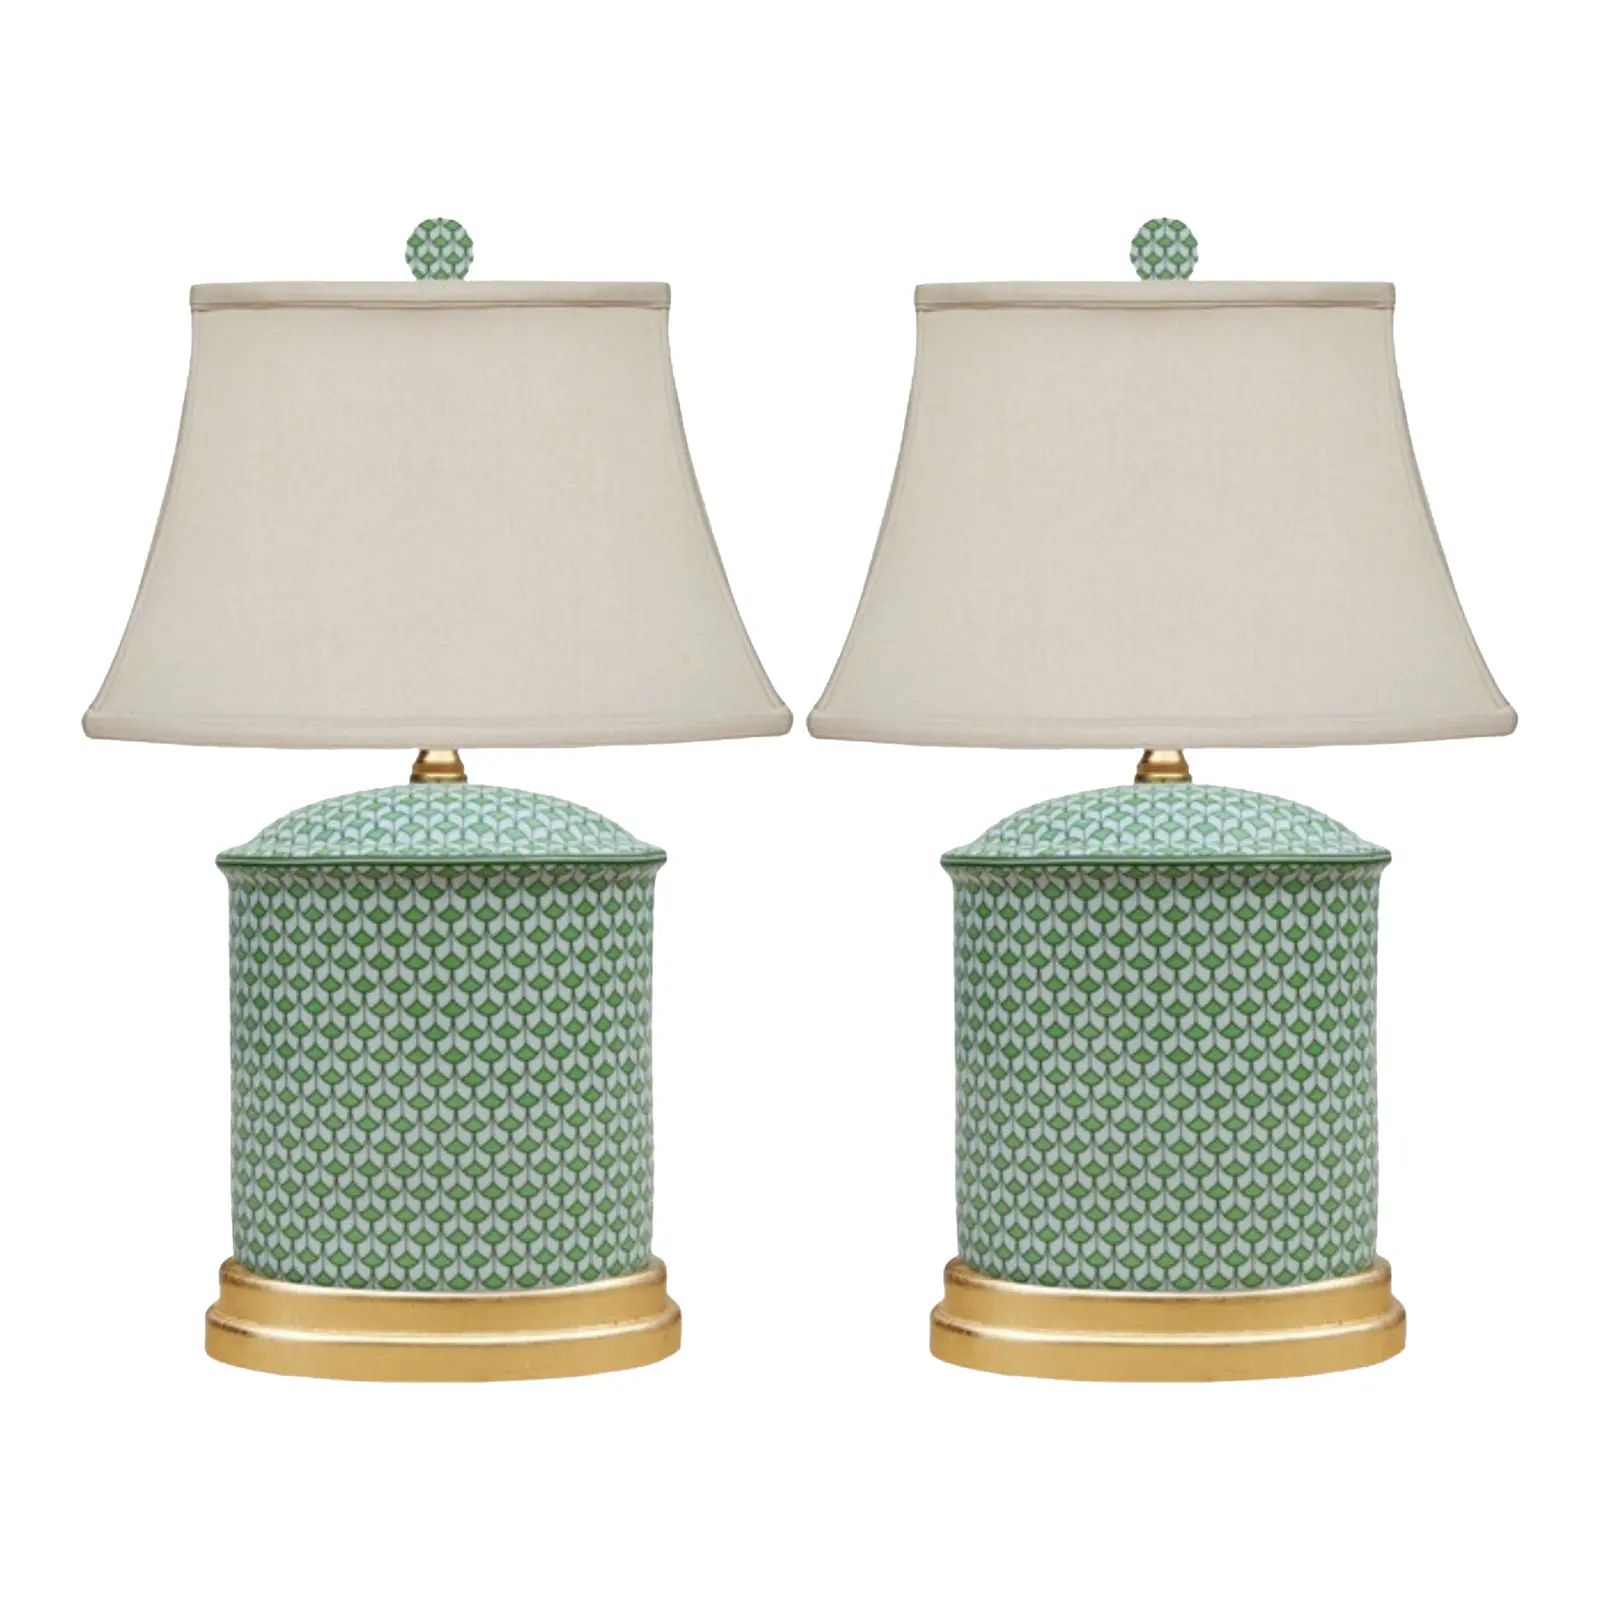 Contemporary Green & White Fishnet Porcelain Table Lamps With Gold Base - a Pair | Chairish